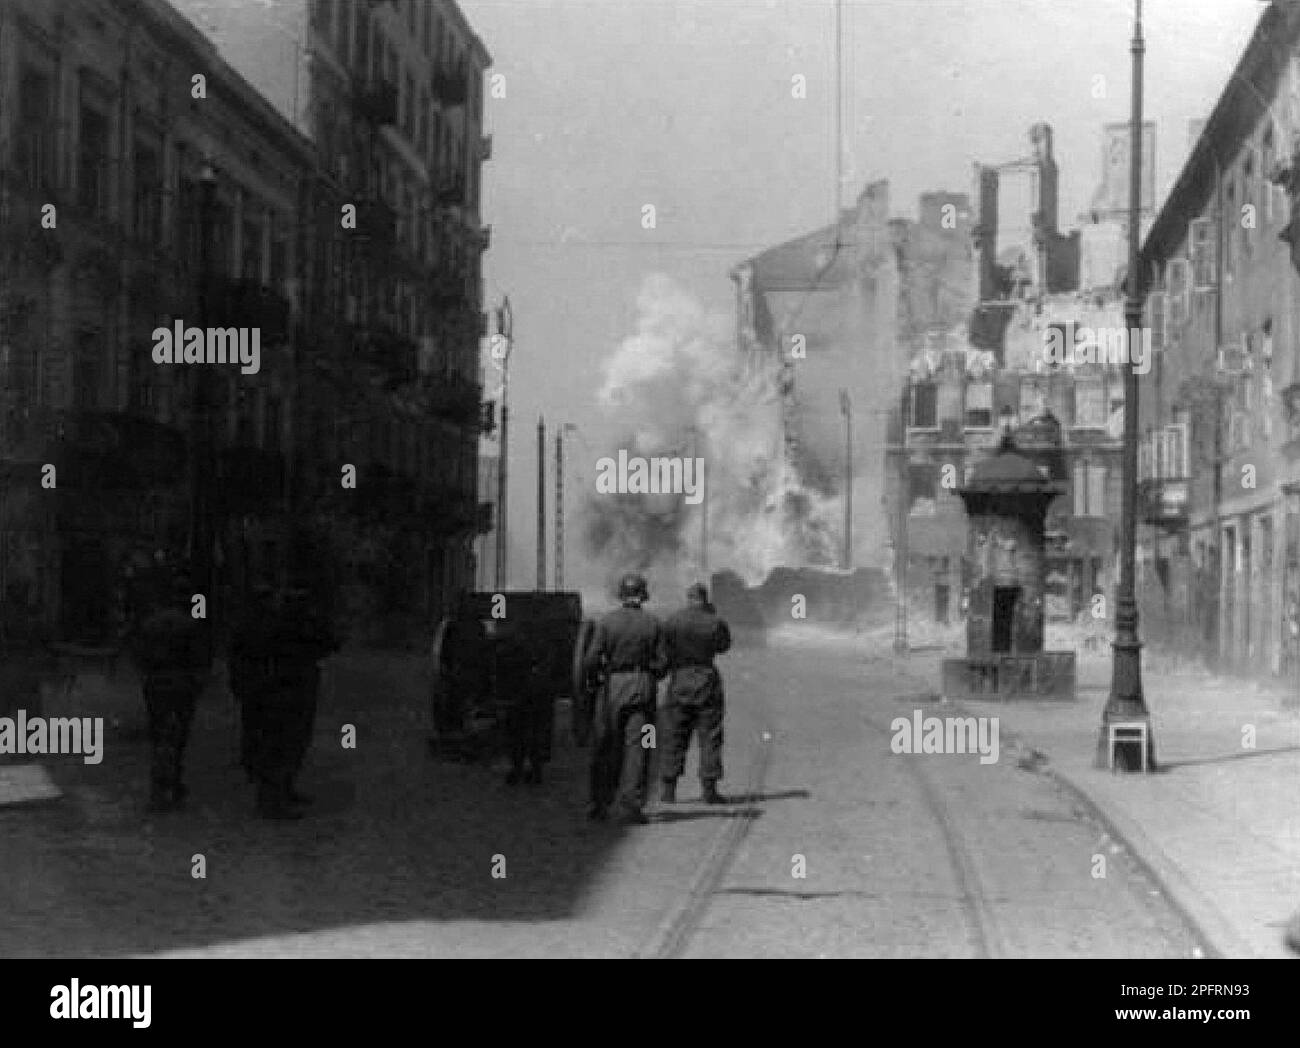 In January 1943 the nazis arrived to round up the Jews of the Warsaw Ghetto  The Jews, resolved to fight it out, took on the SS with homemade and primitive weapons. The defenders were executed or deported and the Ghetto area was systematically demolished. This event is known as The Ghetto Uprising.This image shows a German unit shelling a housing block. in Zamenhof Street. This image is from the German photographic record of the event, known as the Stroop report. Stock Photo